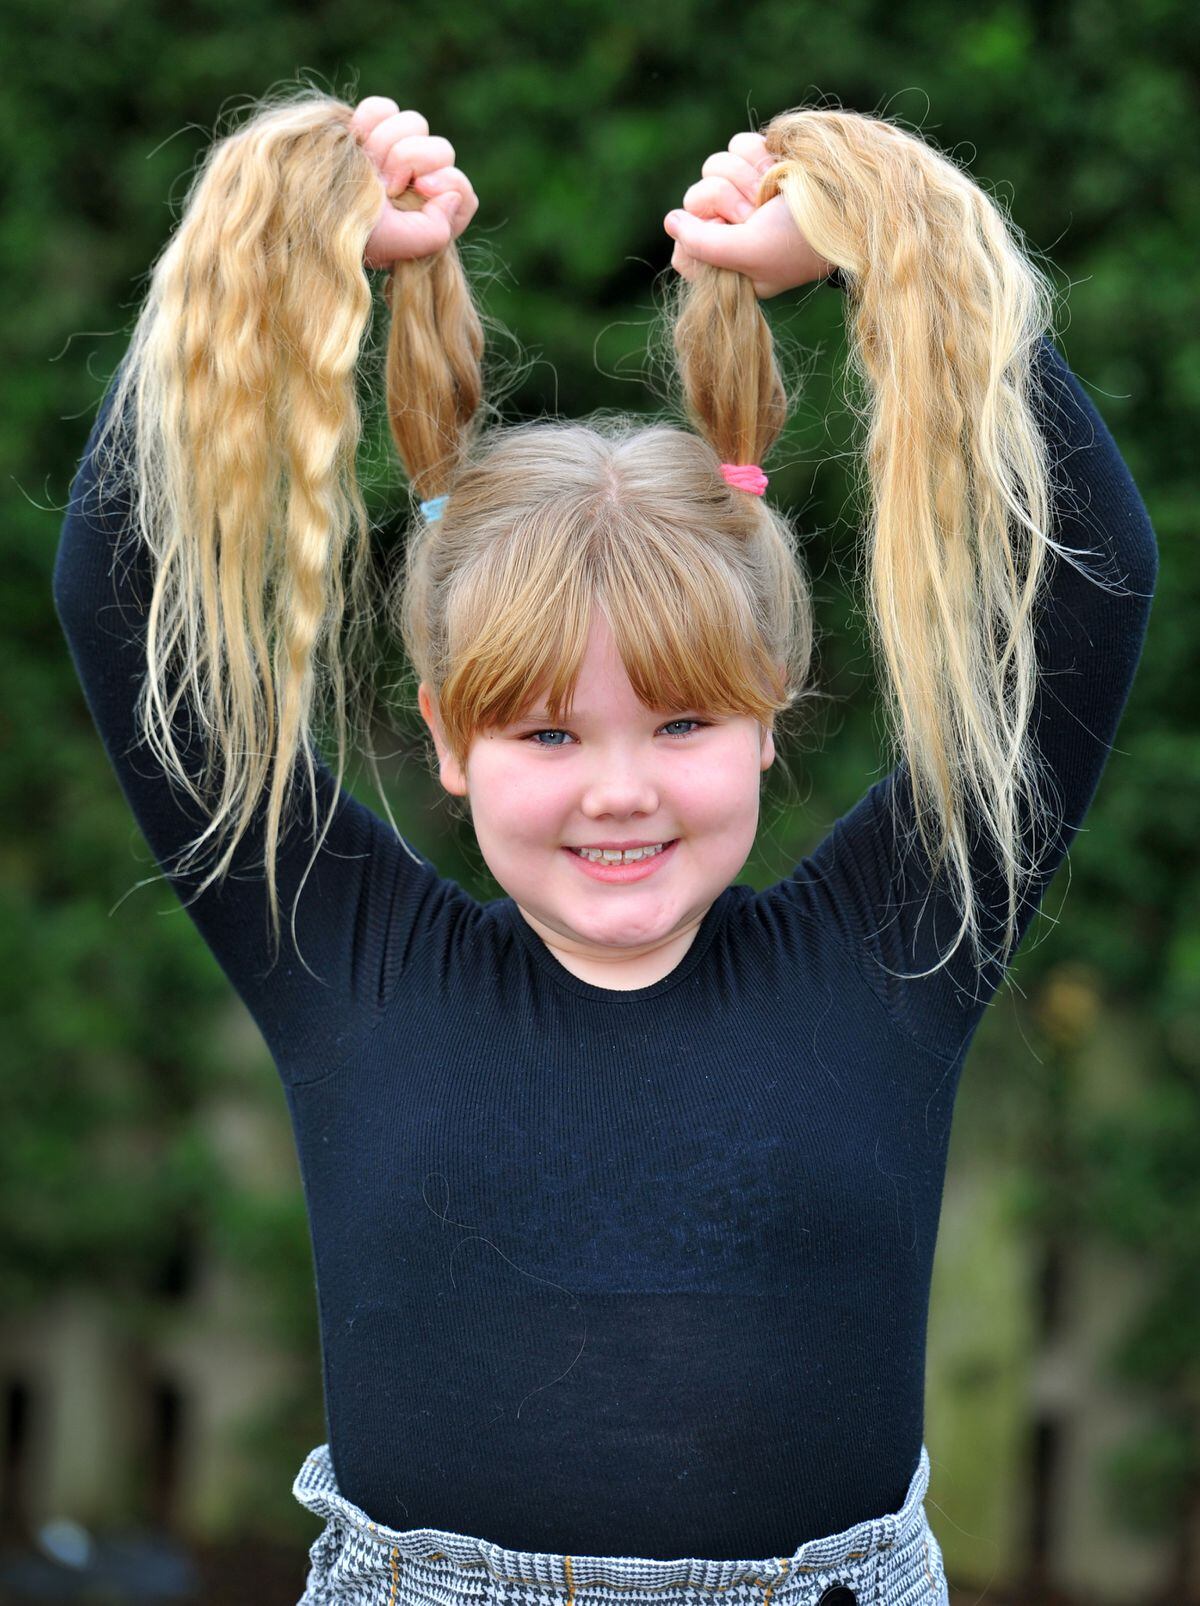 Lilly-Mai Smith, aged eight, from Wednesbury, who is to have her haircut in May